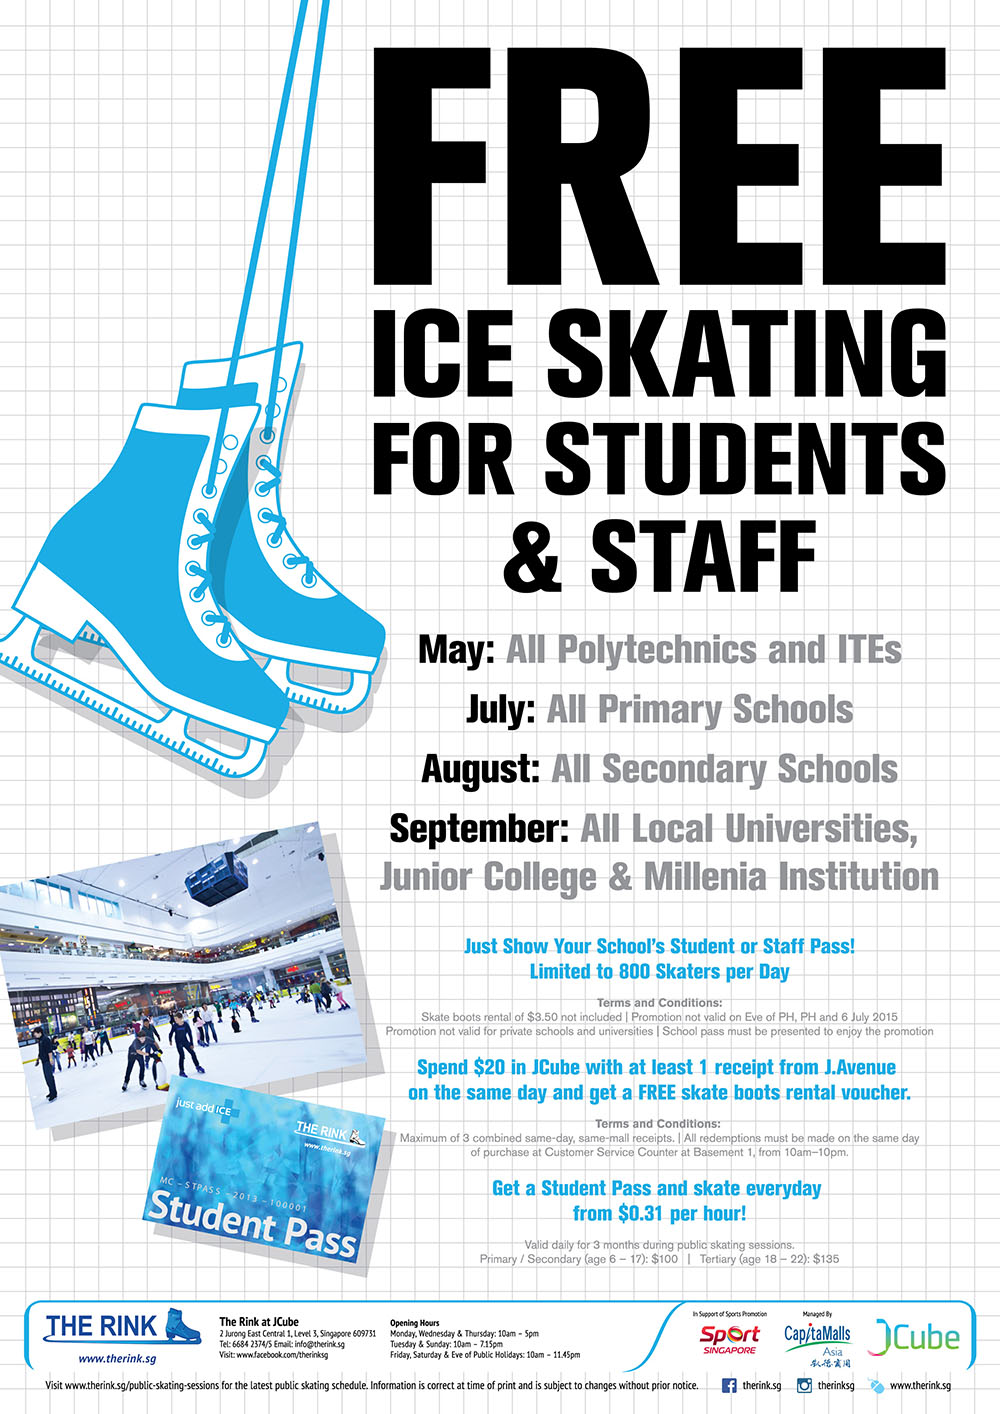 Students Skate for Free